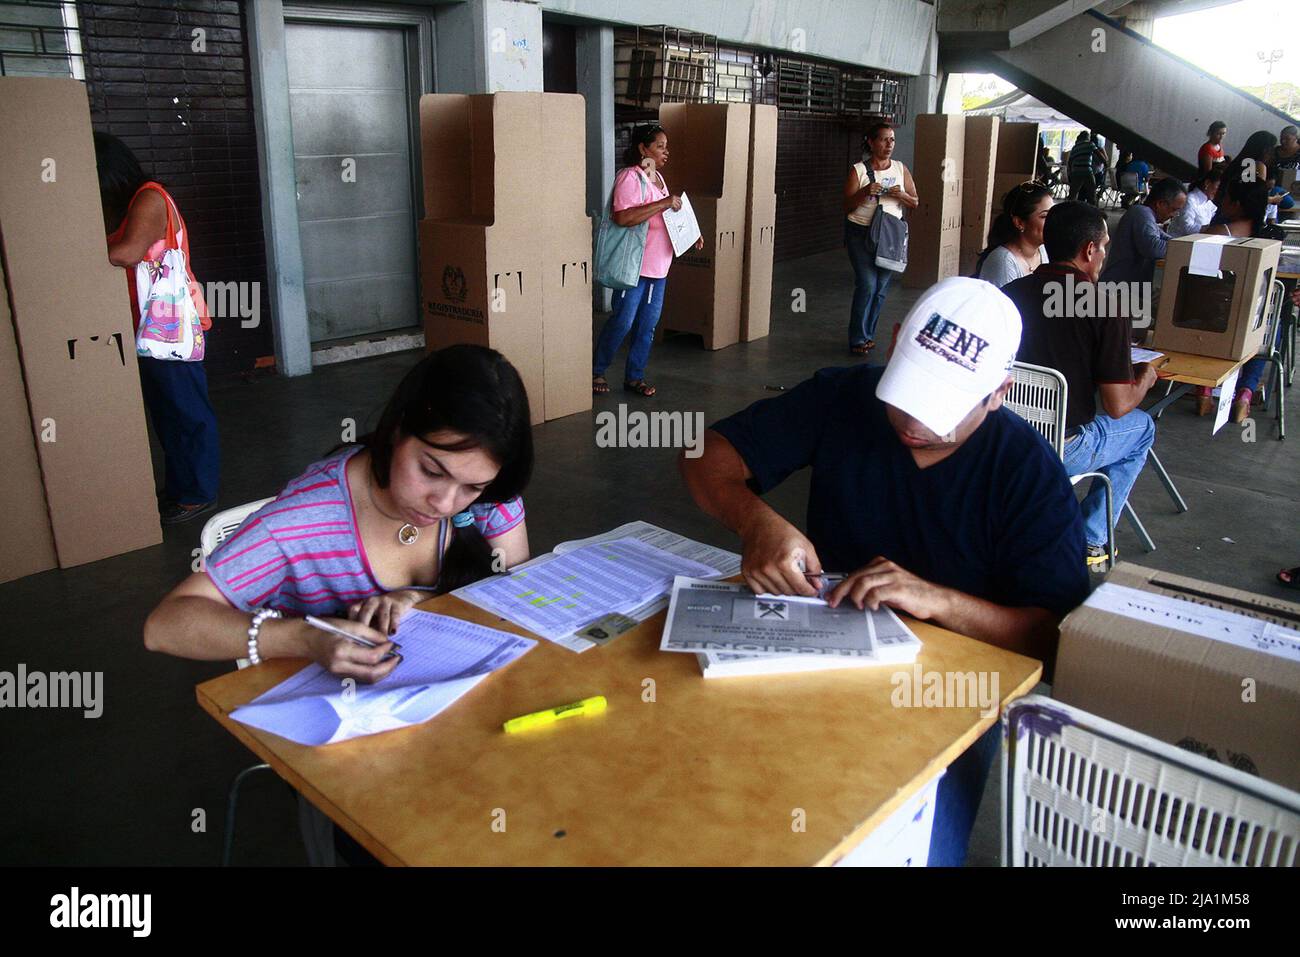 Colombians residing in Venezuela exercise their right to vote this Thursday, May 26, 2022, in the Colombian Guajira. The National Registry of Civil Status reported the installation of border posts in the departments of Norte de Santander, Arauca, La Guajira and Guainía. So that 184,421 voters residing in Venezuela can participate and elect the president and vice president of Colombia for the period 2022-2026. However, for Colombians residing in the country the situation is not so simple, since since 2019 there is no consular representation, after the rupture of diplomatic relations between the Stock Photo